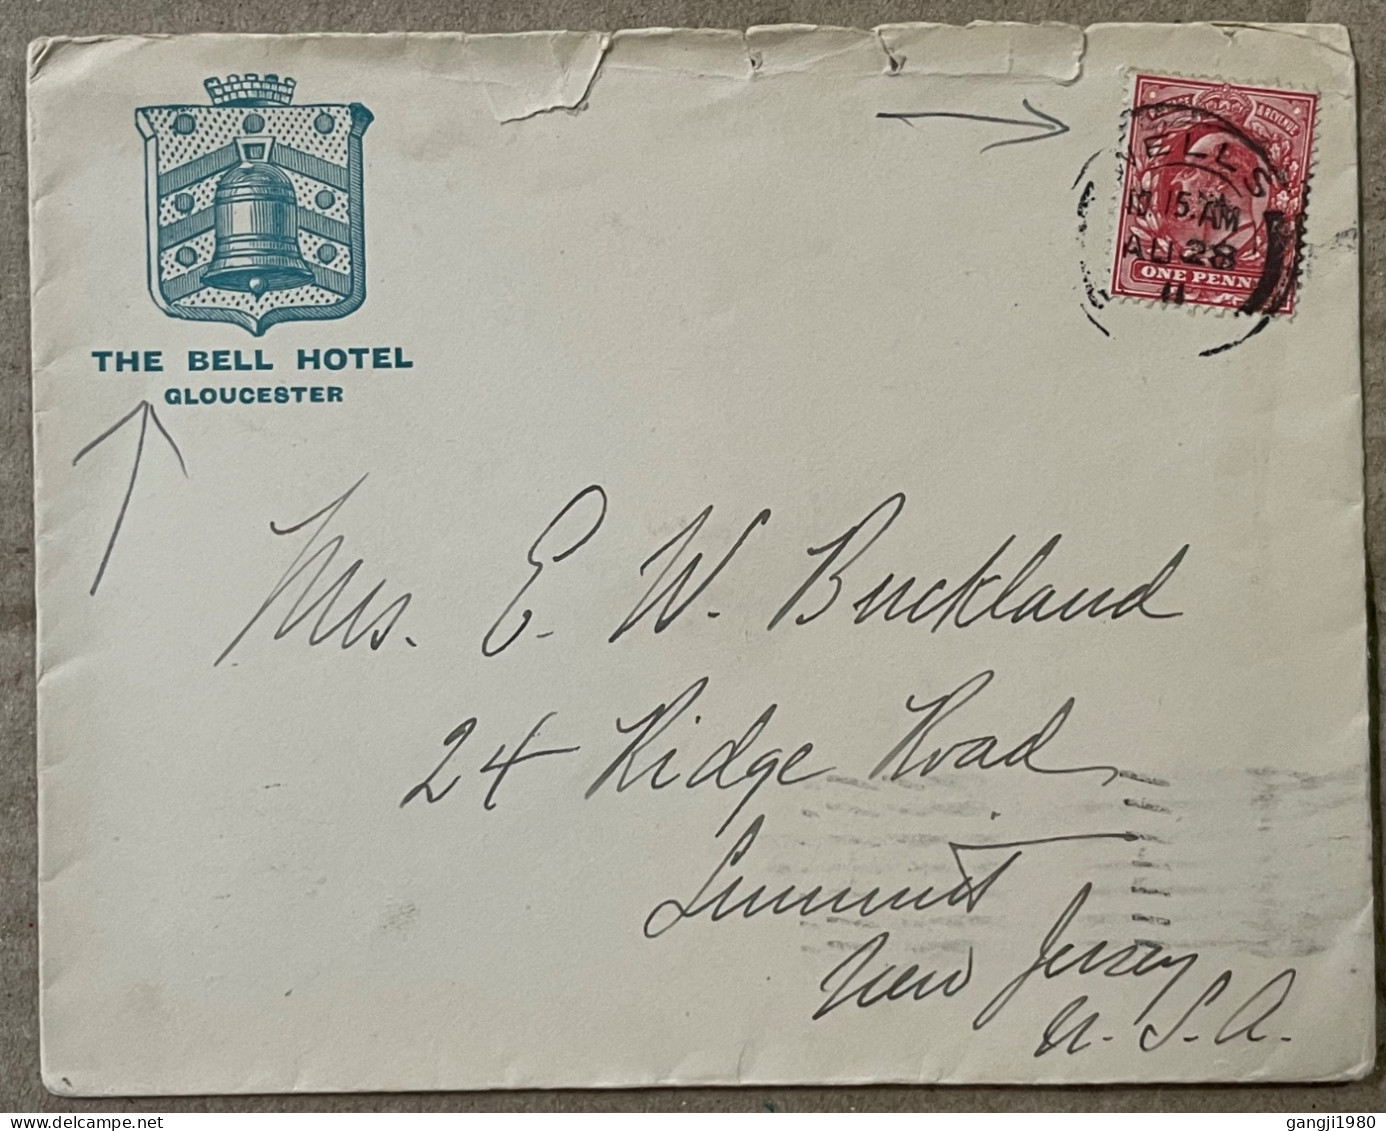 GREAT BRITAIN 1911, ADVERTISING THE BELL HOTEL GLOUCESTER, EDWARD STAMP, COVER USED TO USA, WELLS & SUMMIT CITY CANCEL. - Storia Postale